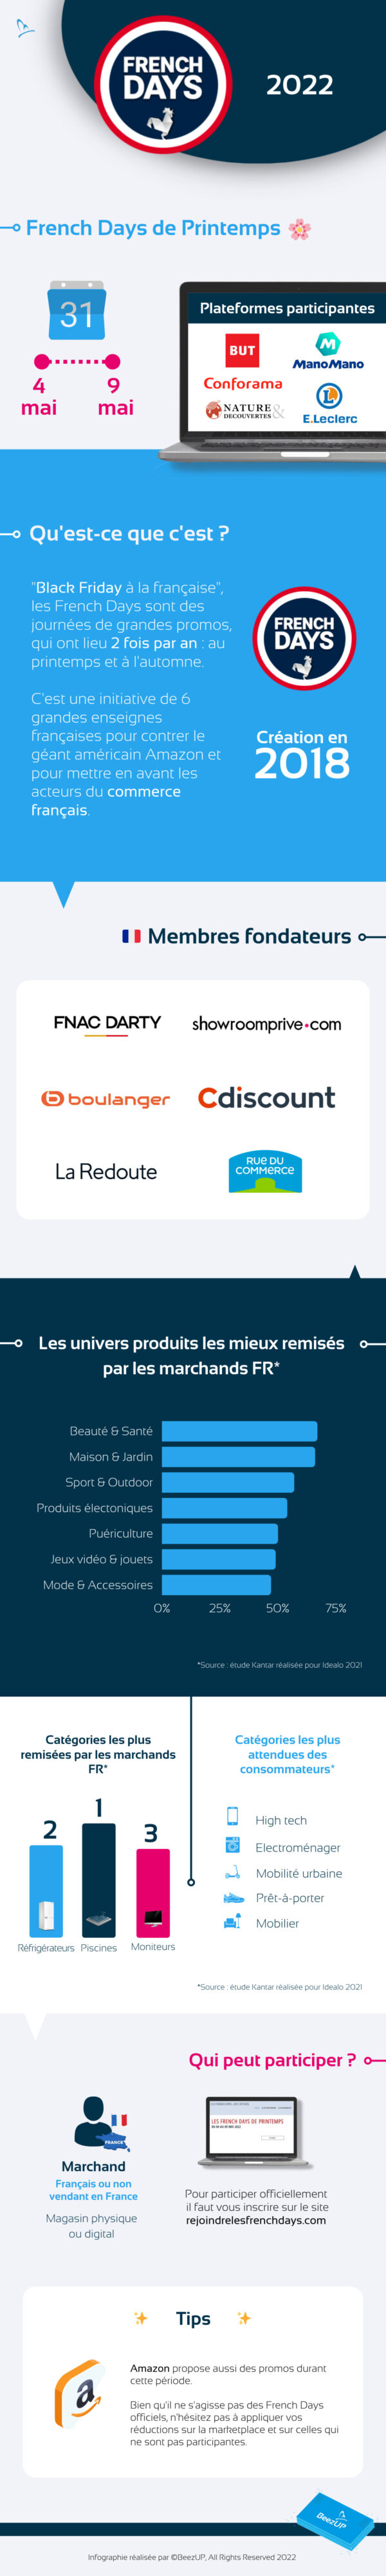 Infographie French Days 2022 | BeezUP